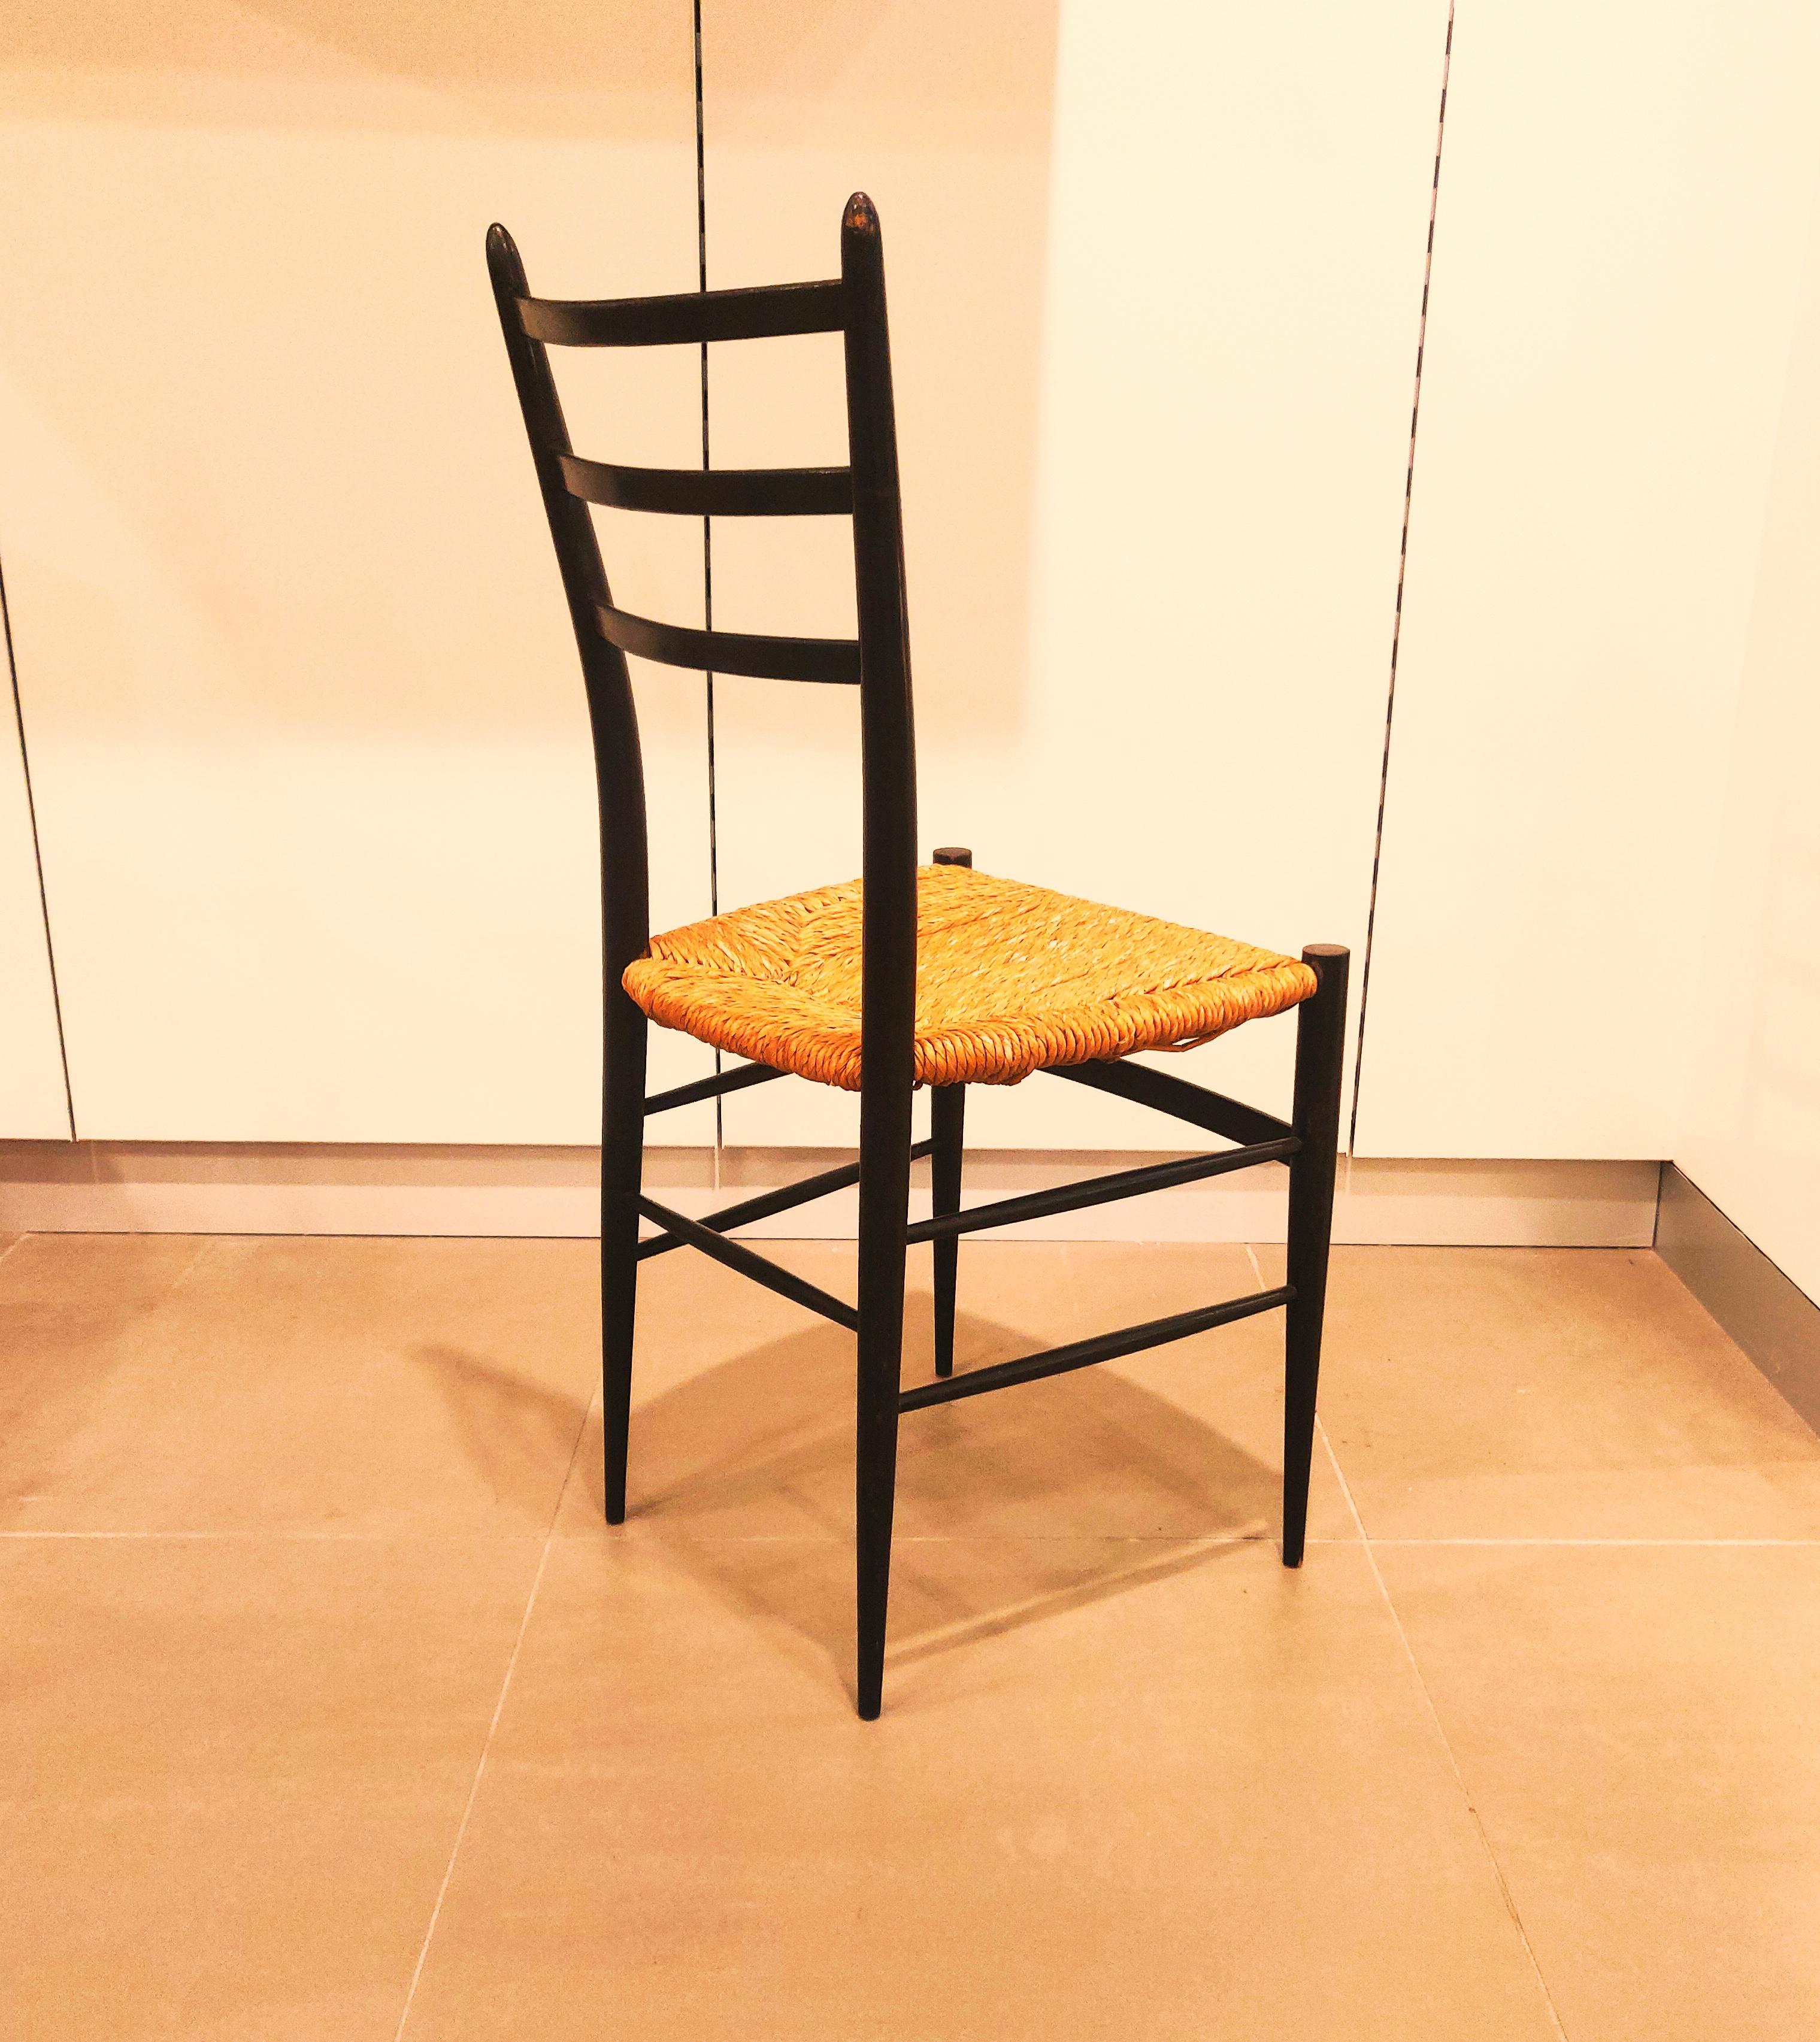 Minimalist Spinnetto Chair by Chiavari, 1960s For Sale